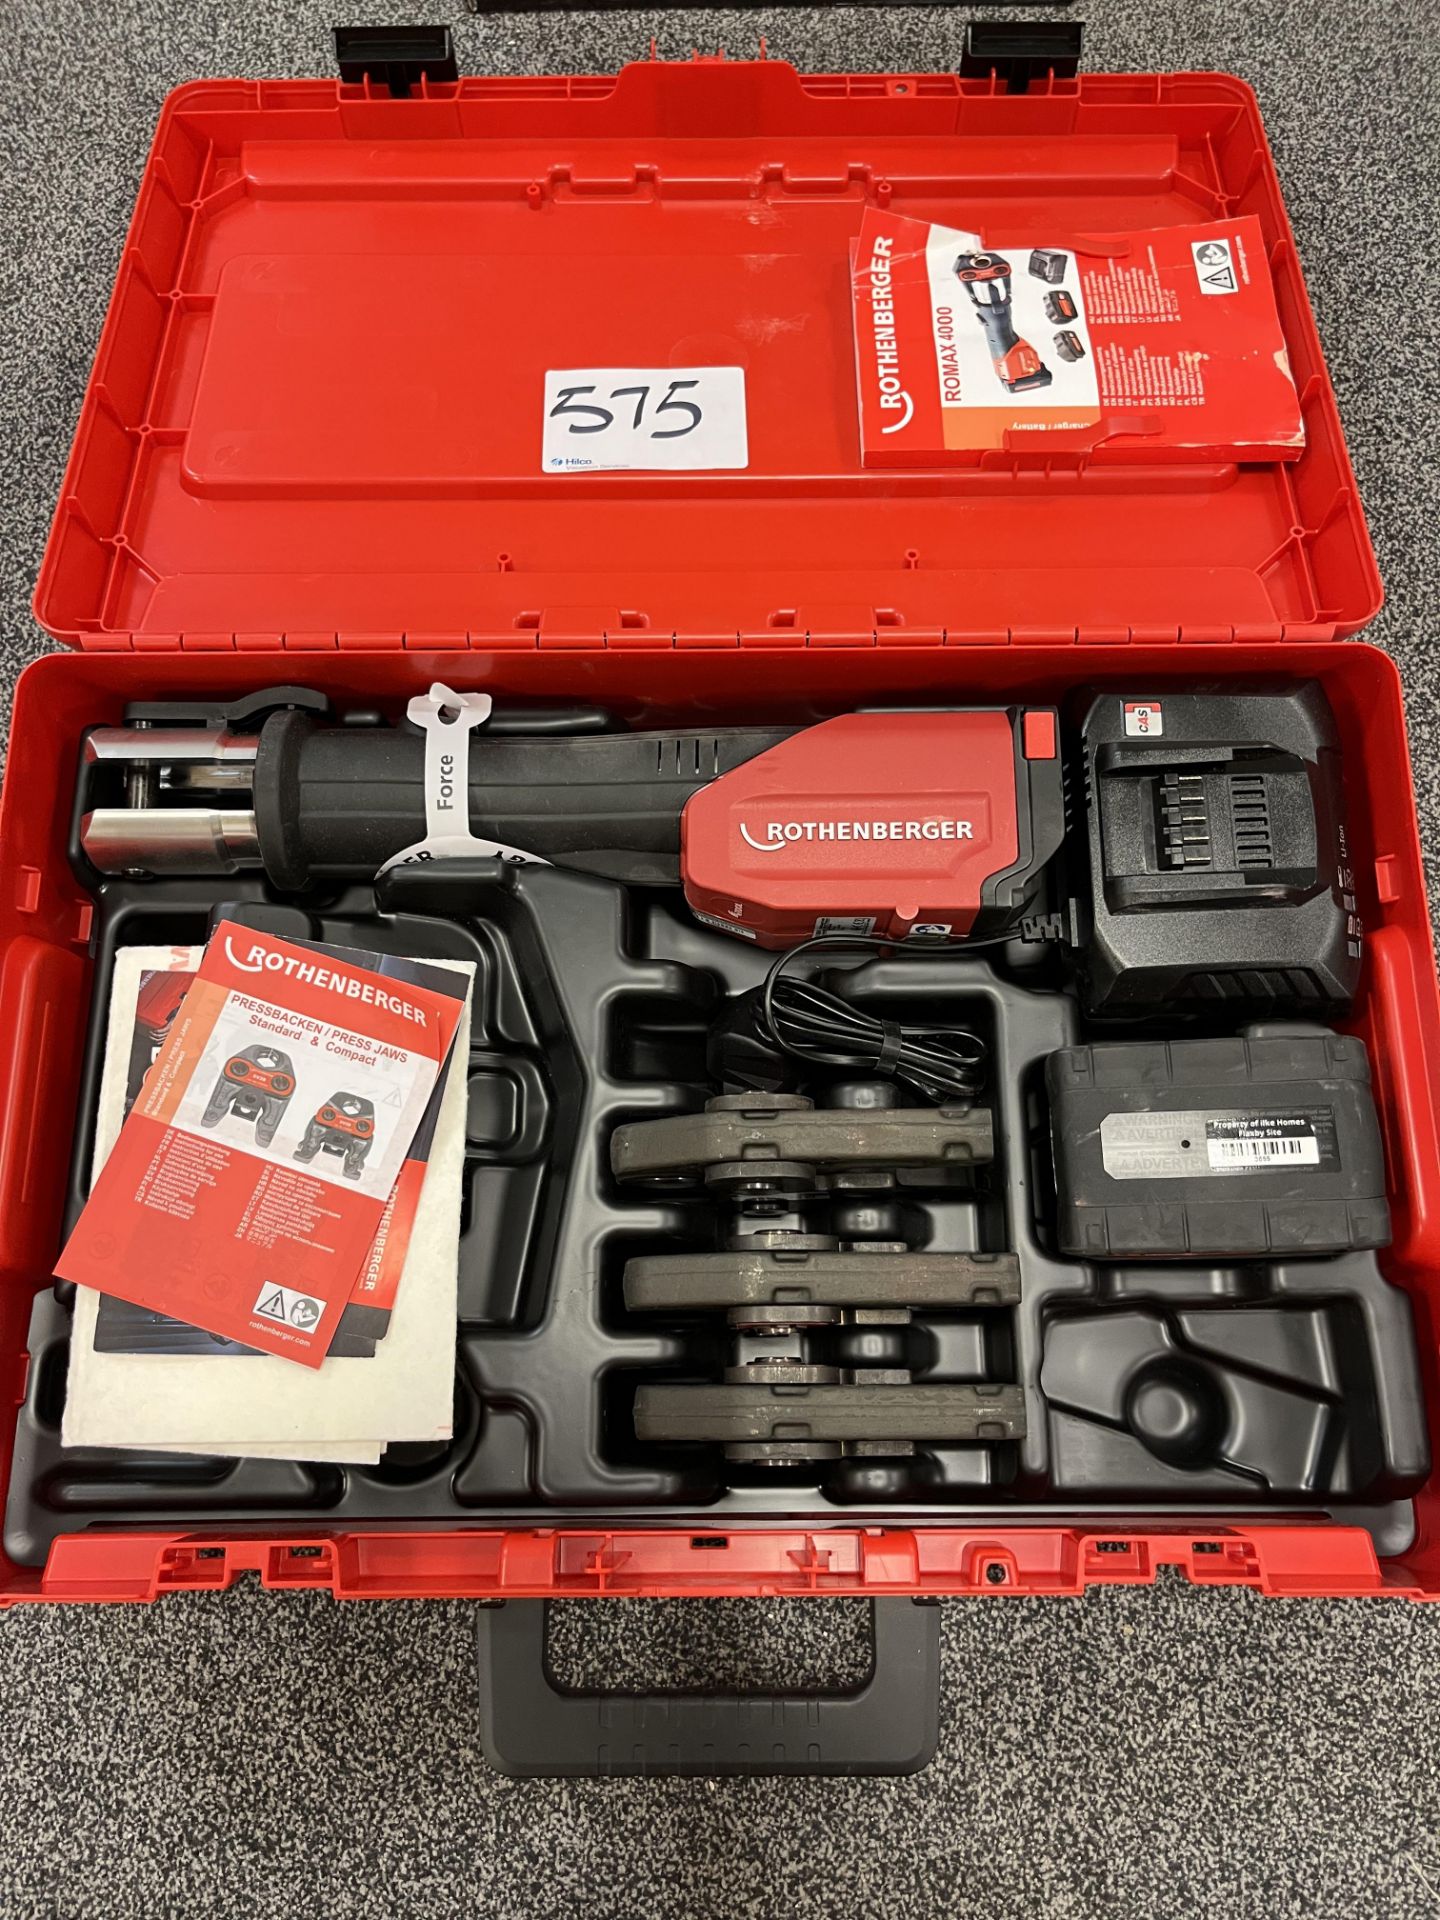 Rothenbierger ROMAX 4000 Cordless Press with 3 Jaws and Battery Charger - Image 2 of 2